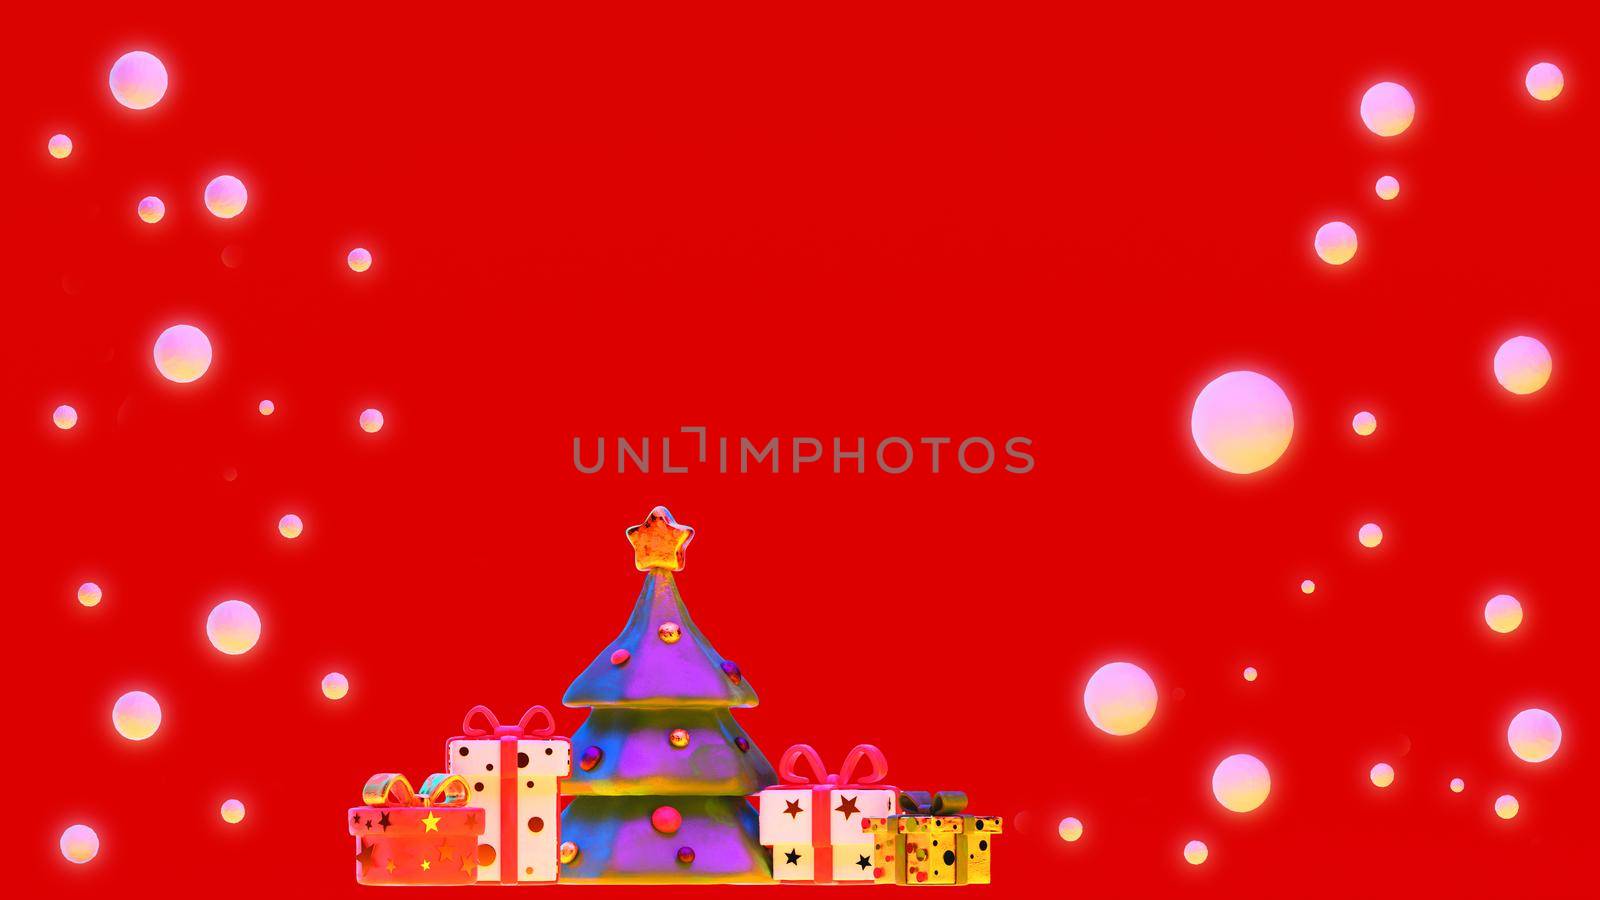 Christmas tree with gifts under falling snow. New Year clay pop illustration. Clipping path included. 3d render template for holiday poster.